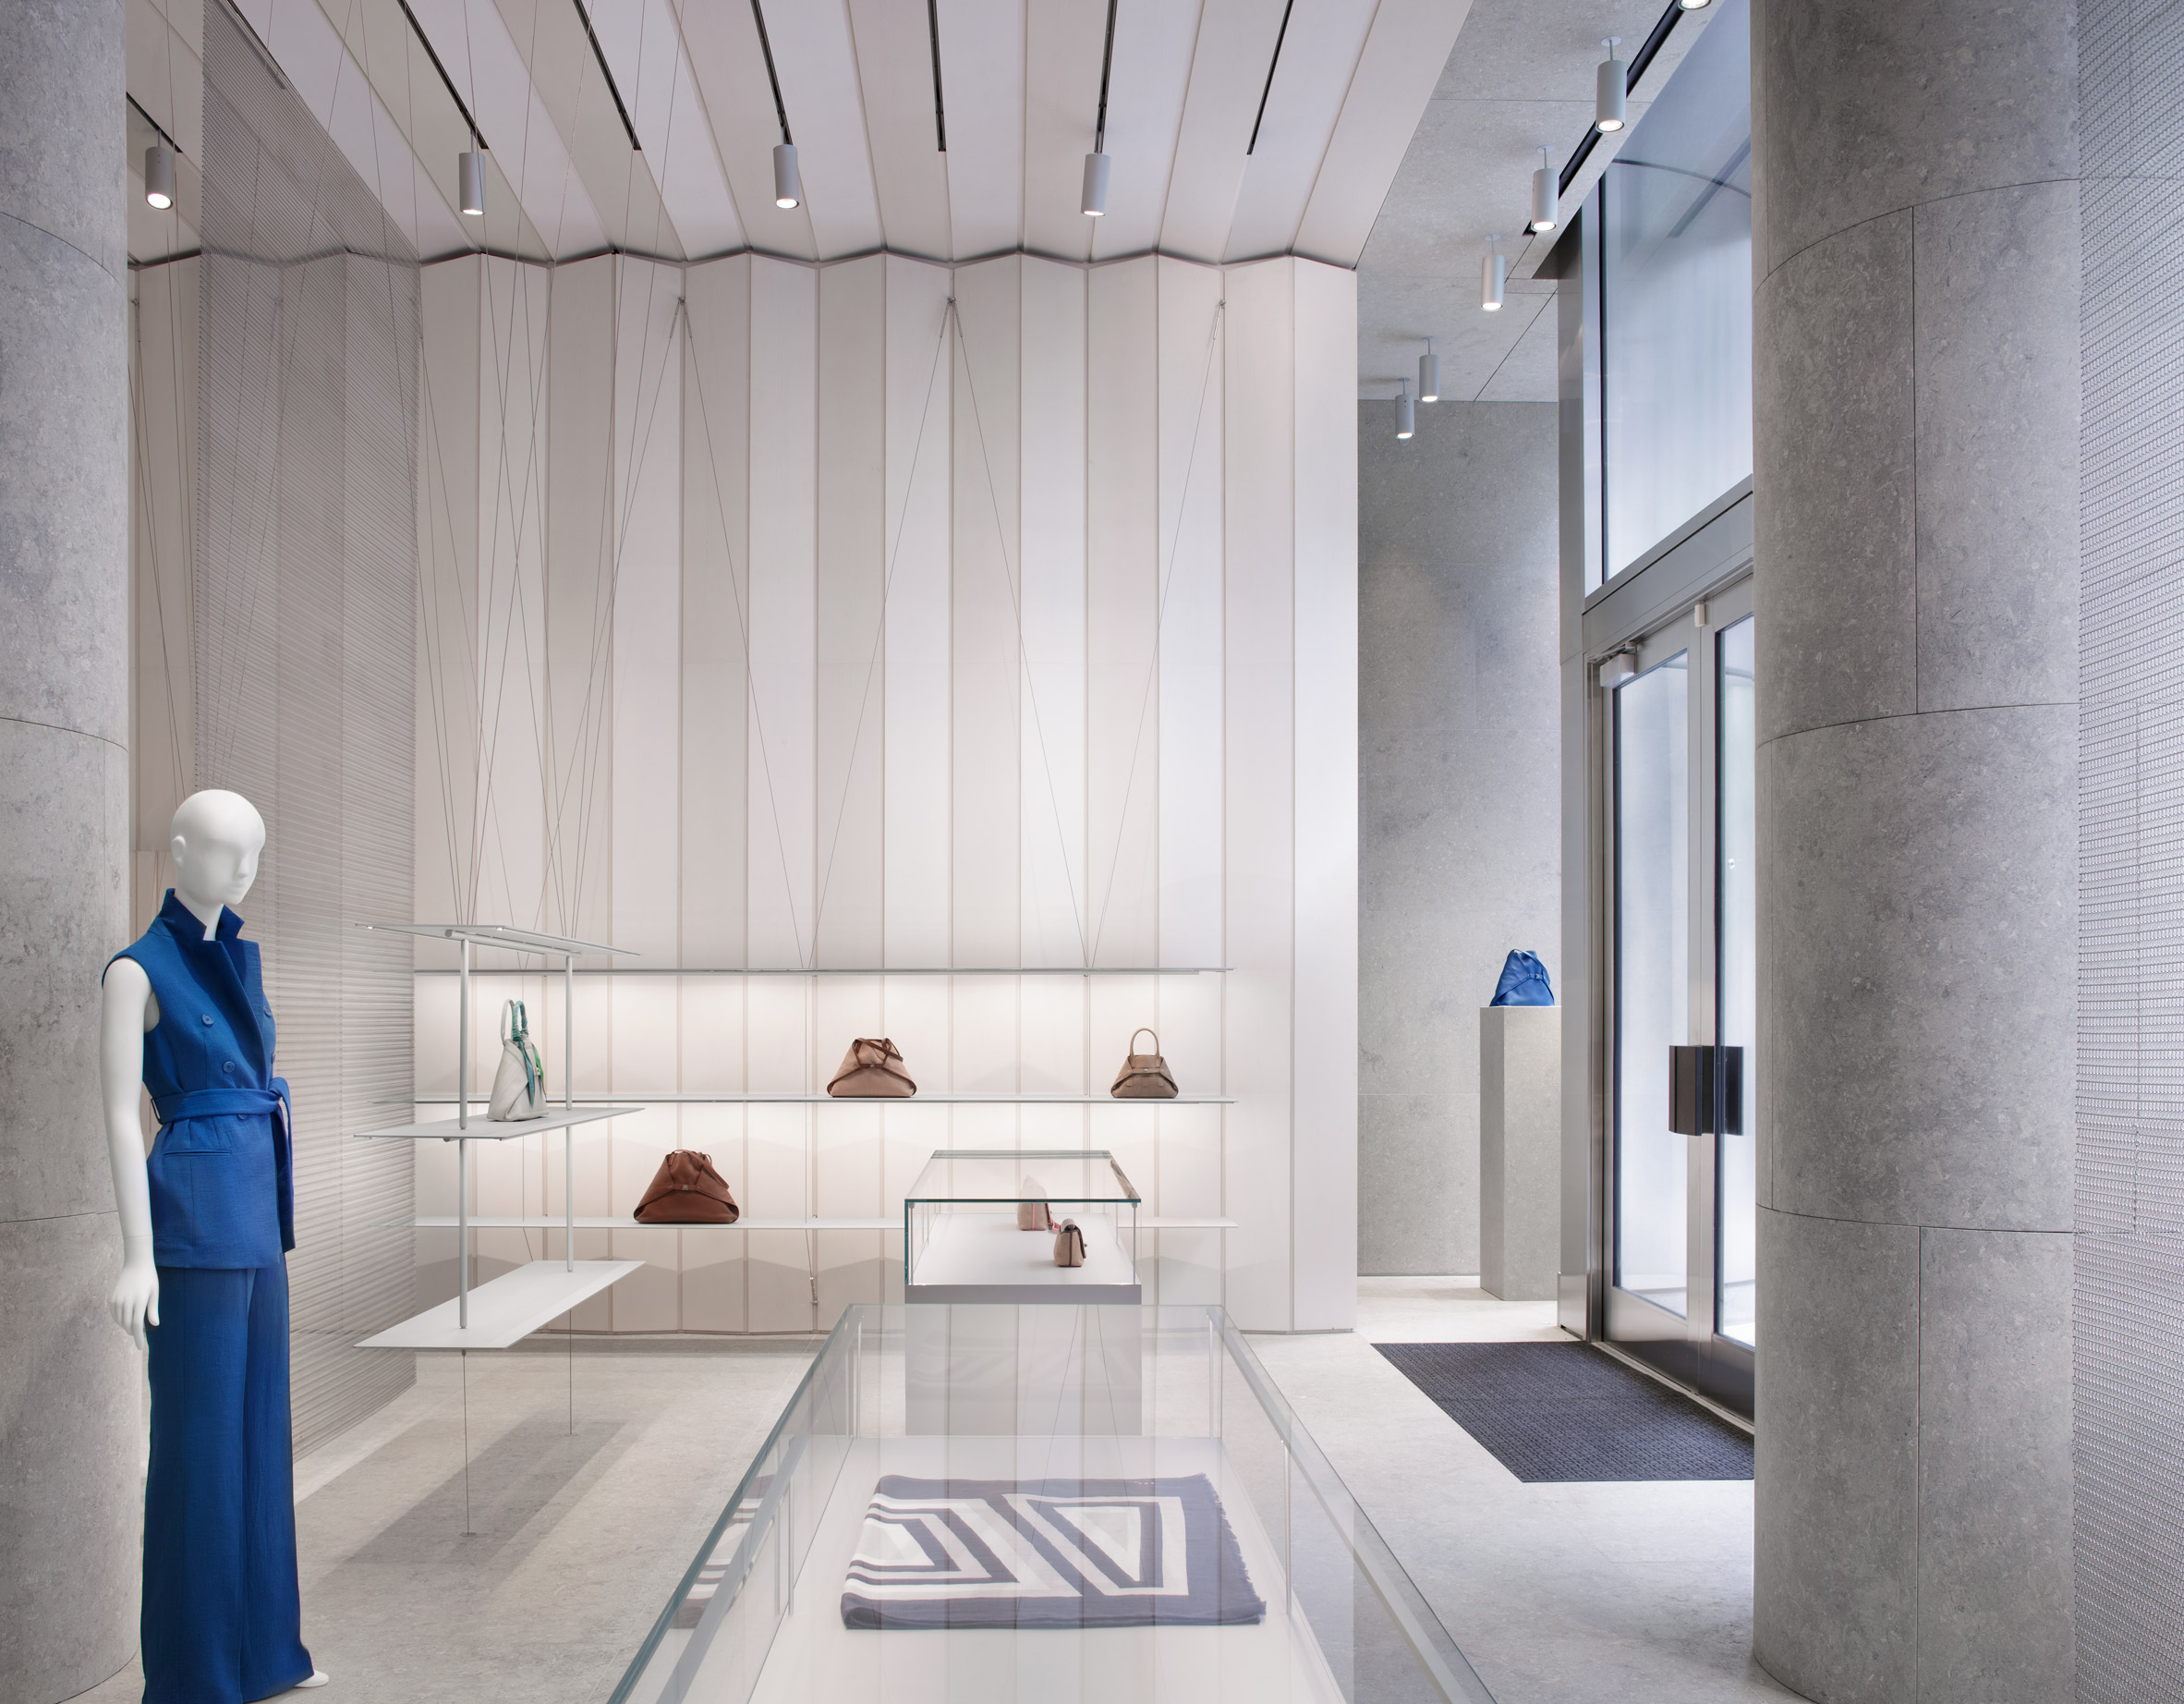 Boutique featuring pleated walls and floating shelves